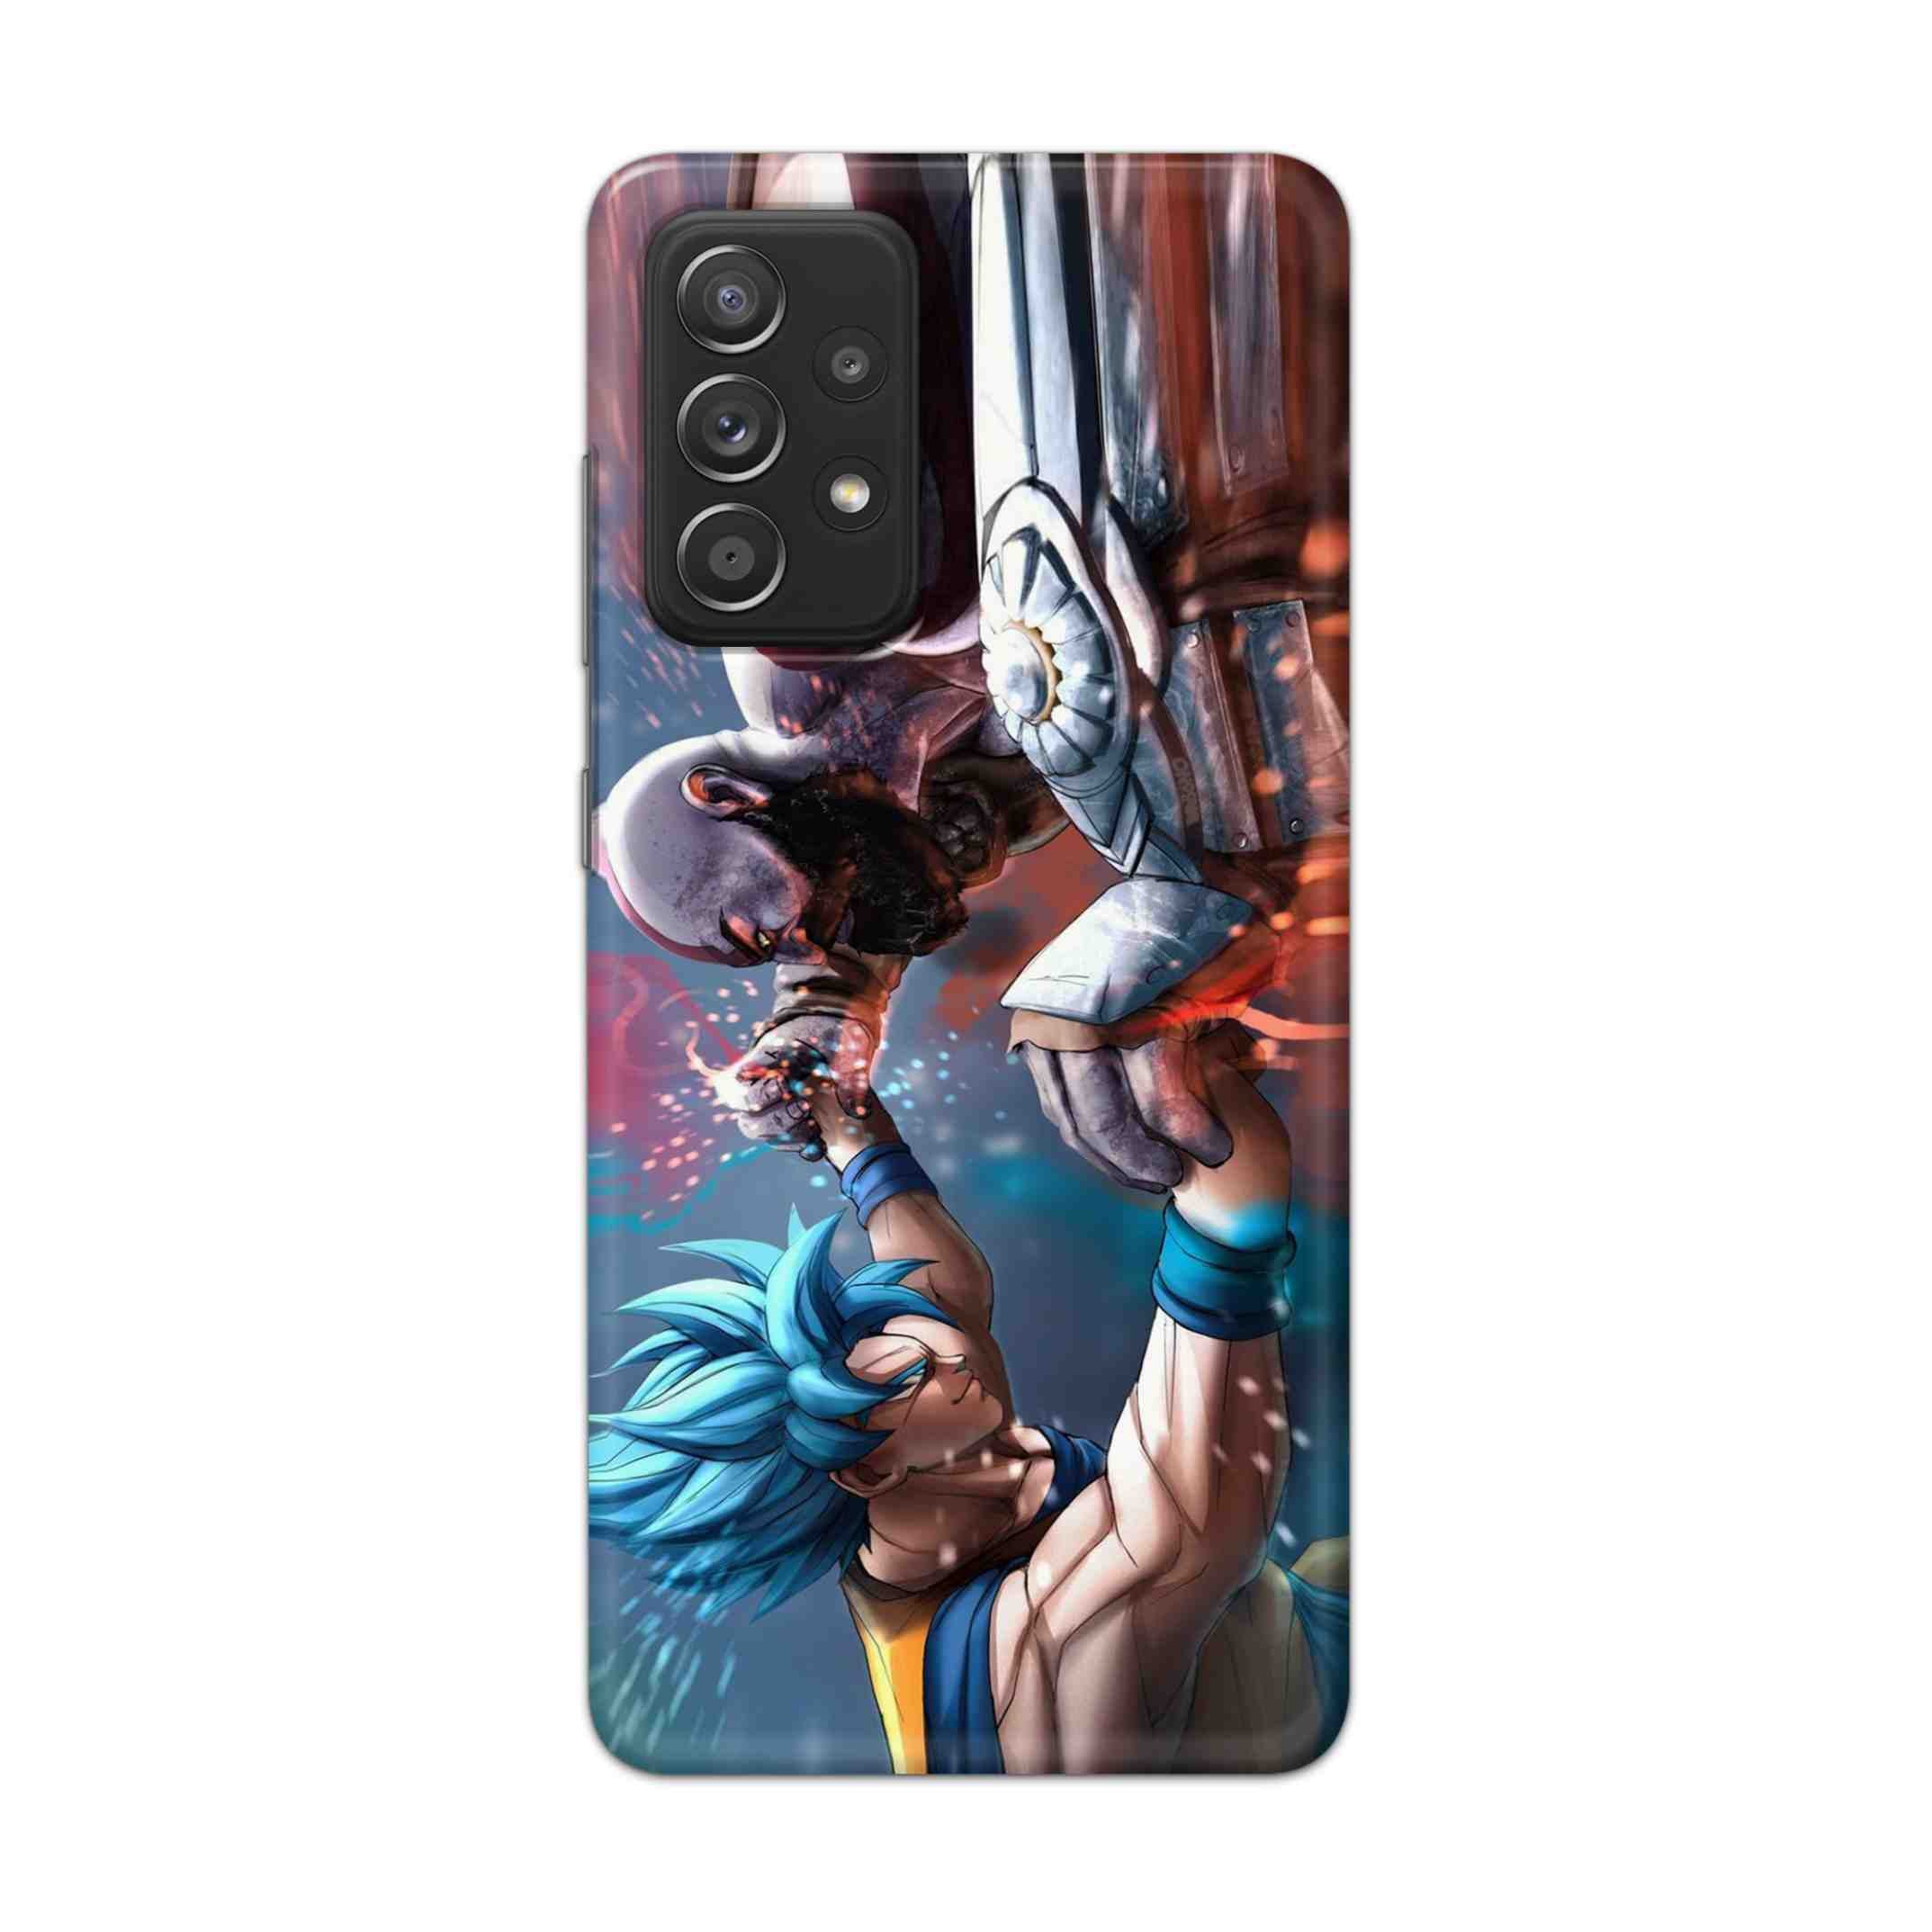 Buy Goku Vs Kratos Hard Back Mobile Phone Case Cover For Samsung Galaxy A52 Online